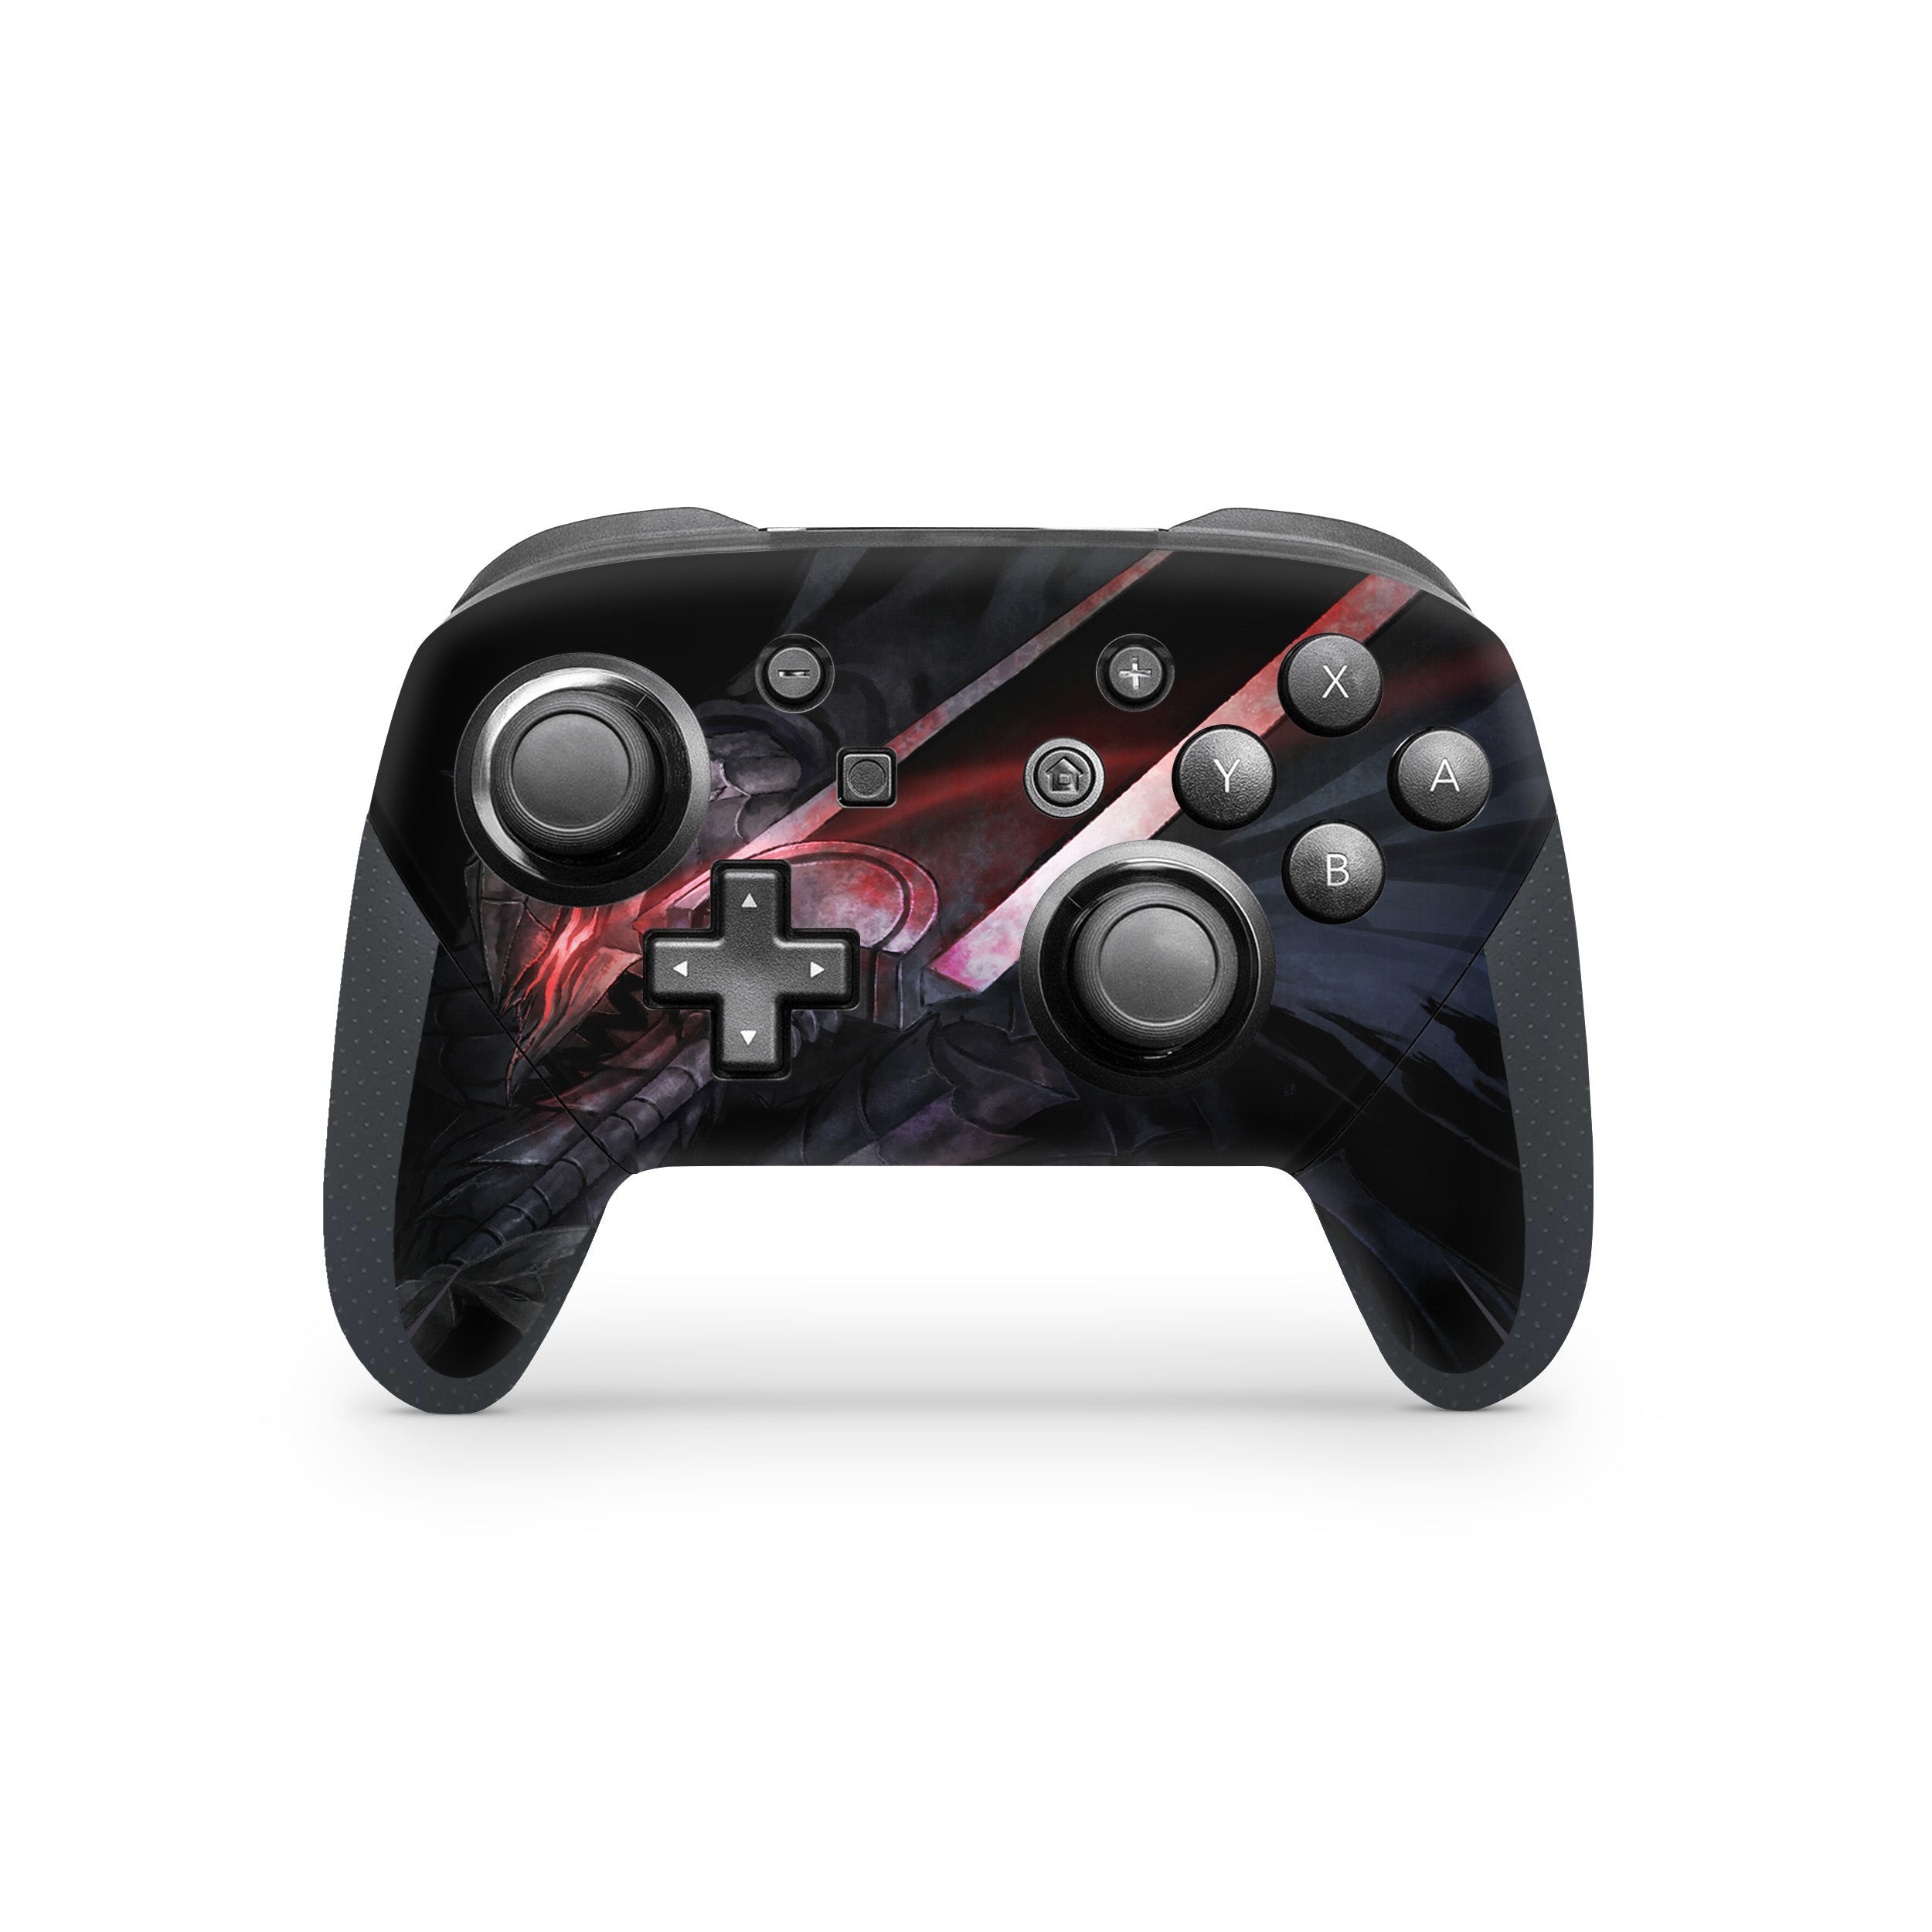 A video game skin featuring a Berserk Guts design for the Switch Pro Controller.